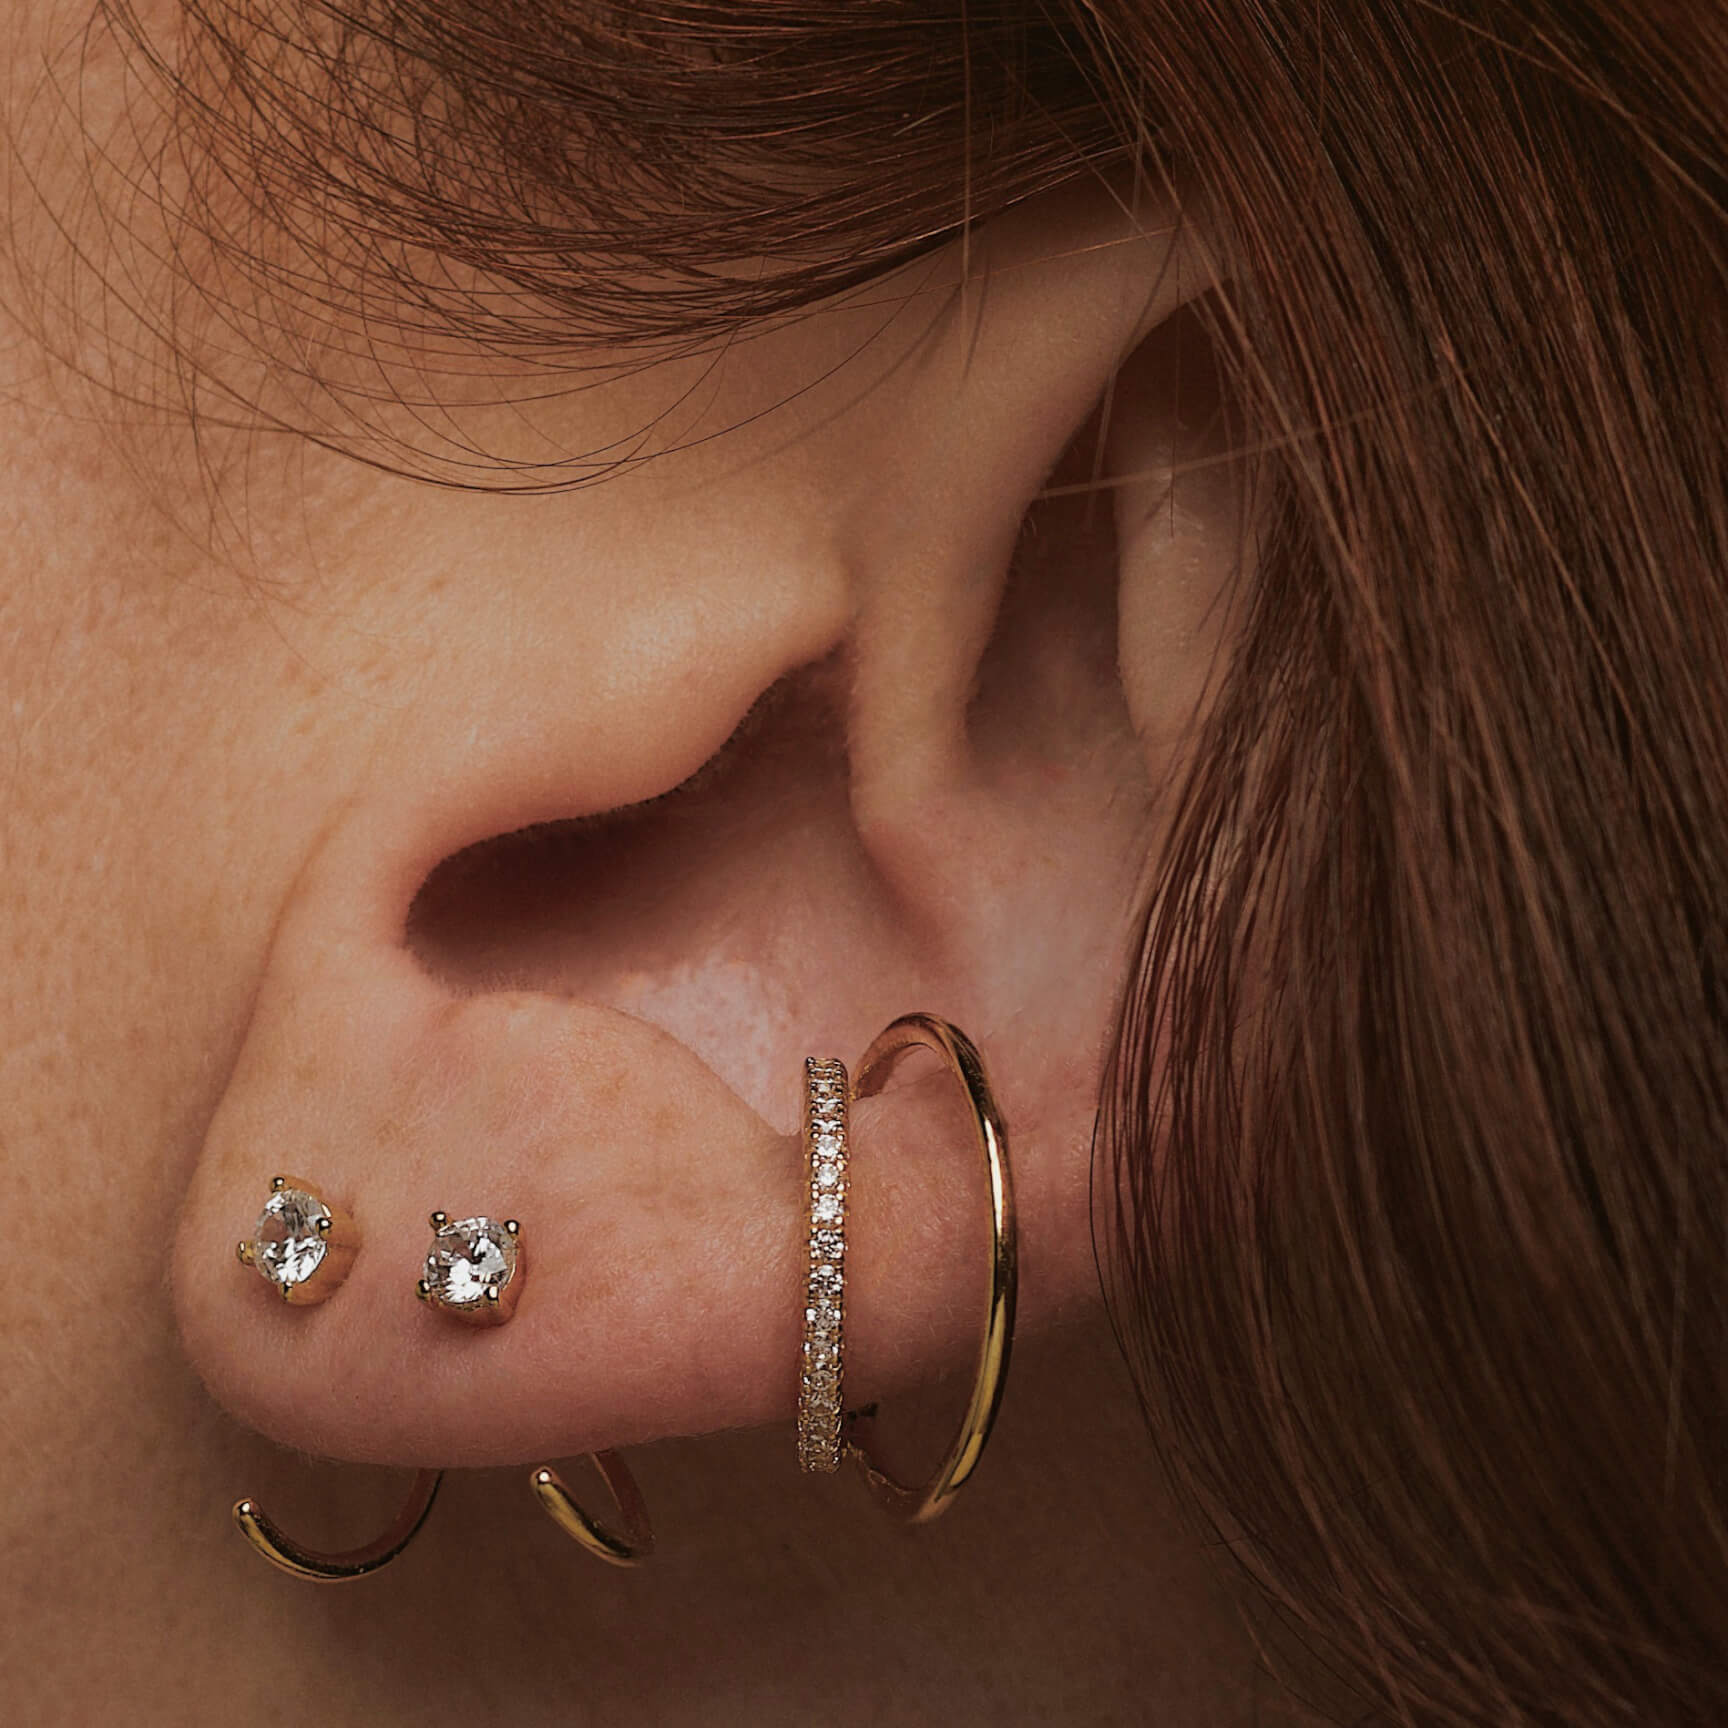 Statement earrings, without the piercings